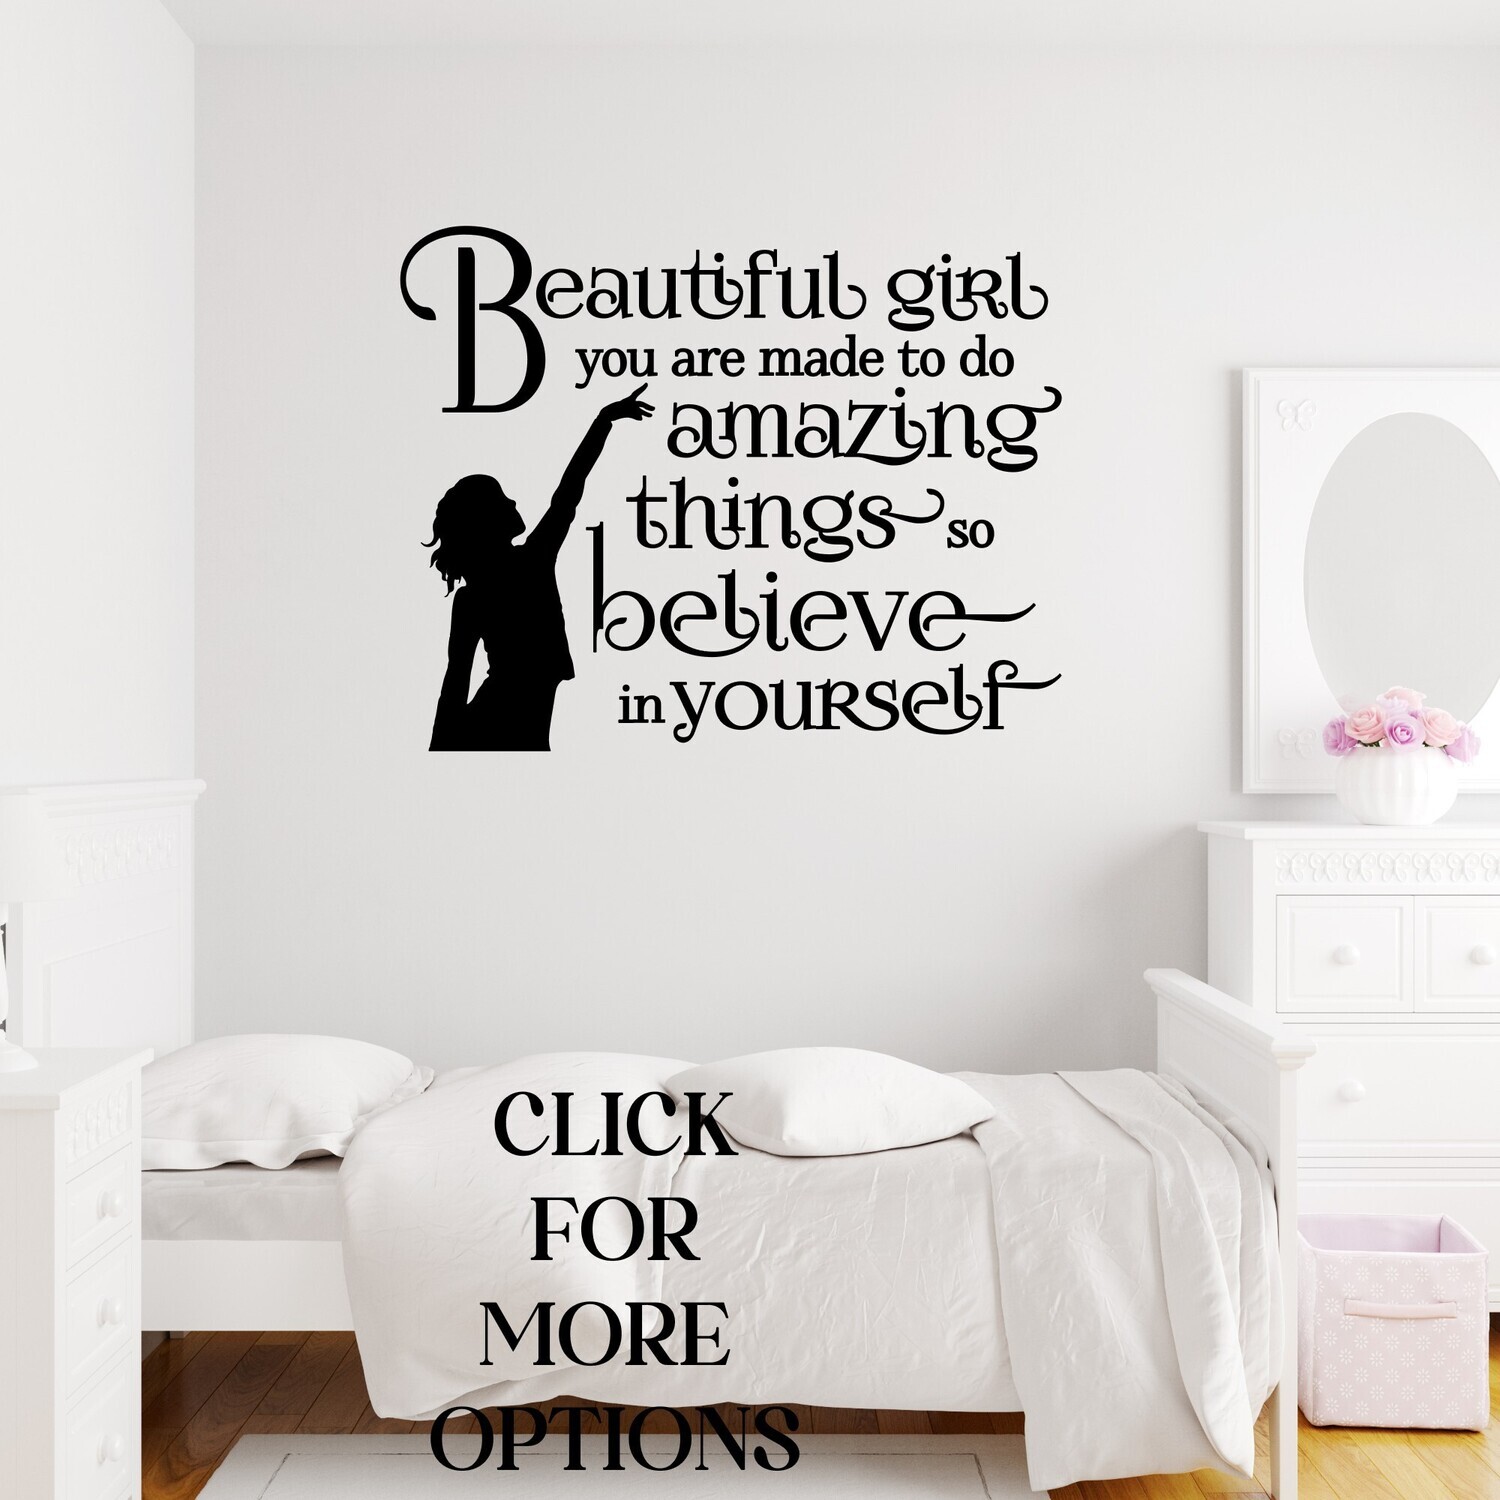 Motivational Wall Decal Stickers| Kids Bedroom Decor| Bathroom Wall Art|  Wall Quotes| Mirror Decor